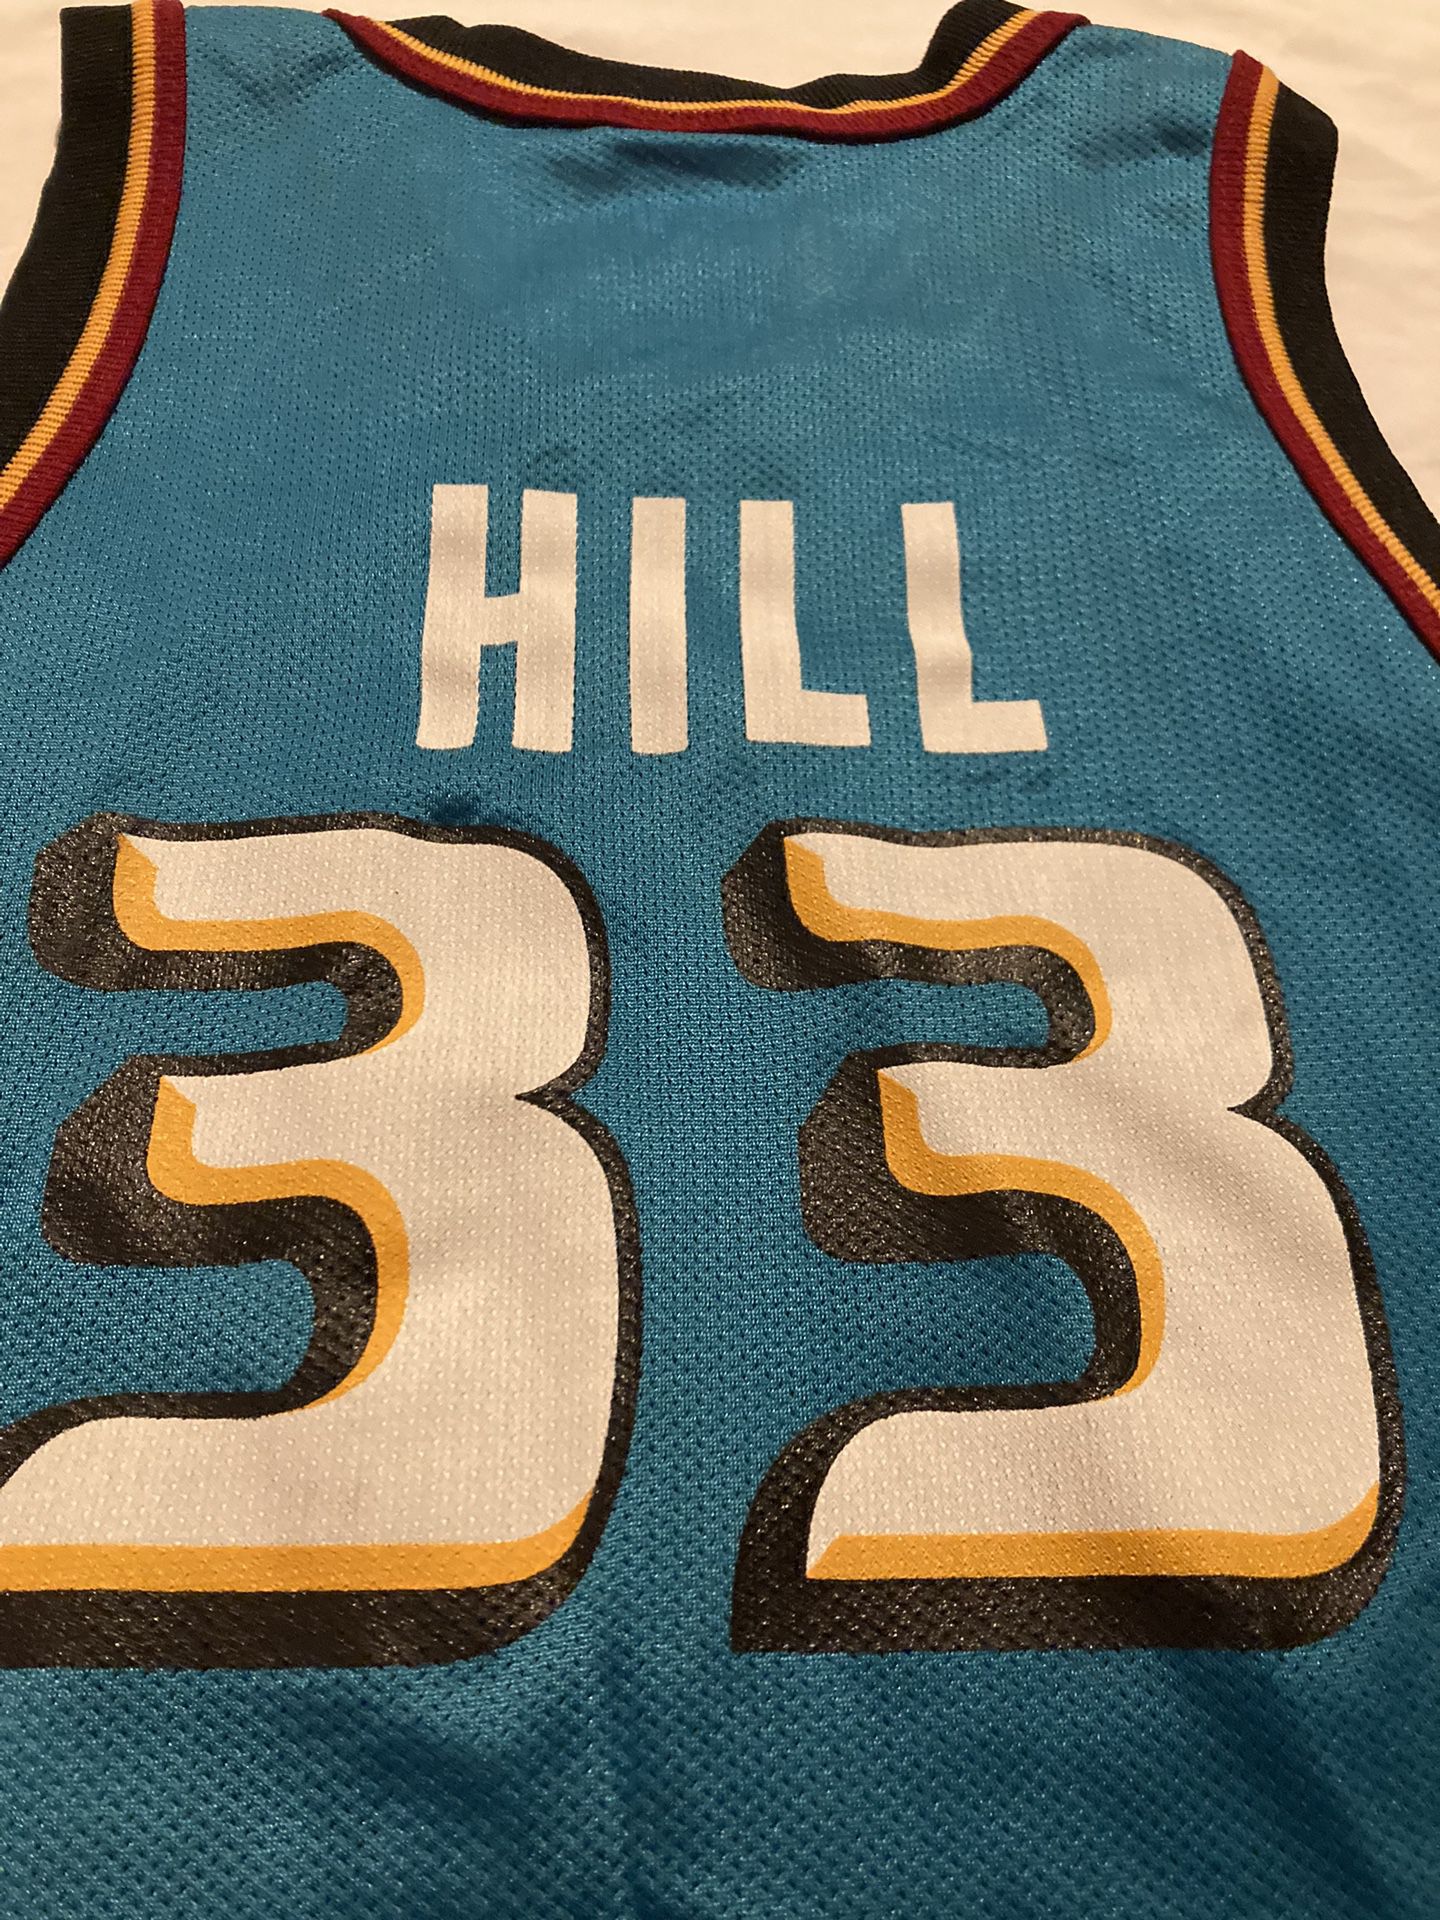 Mitchell & Ness Grant Hill 1995 - 96 Detroit Pistons Jersey for Sale in  Irwindale, CA - OfferUp